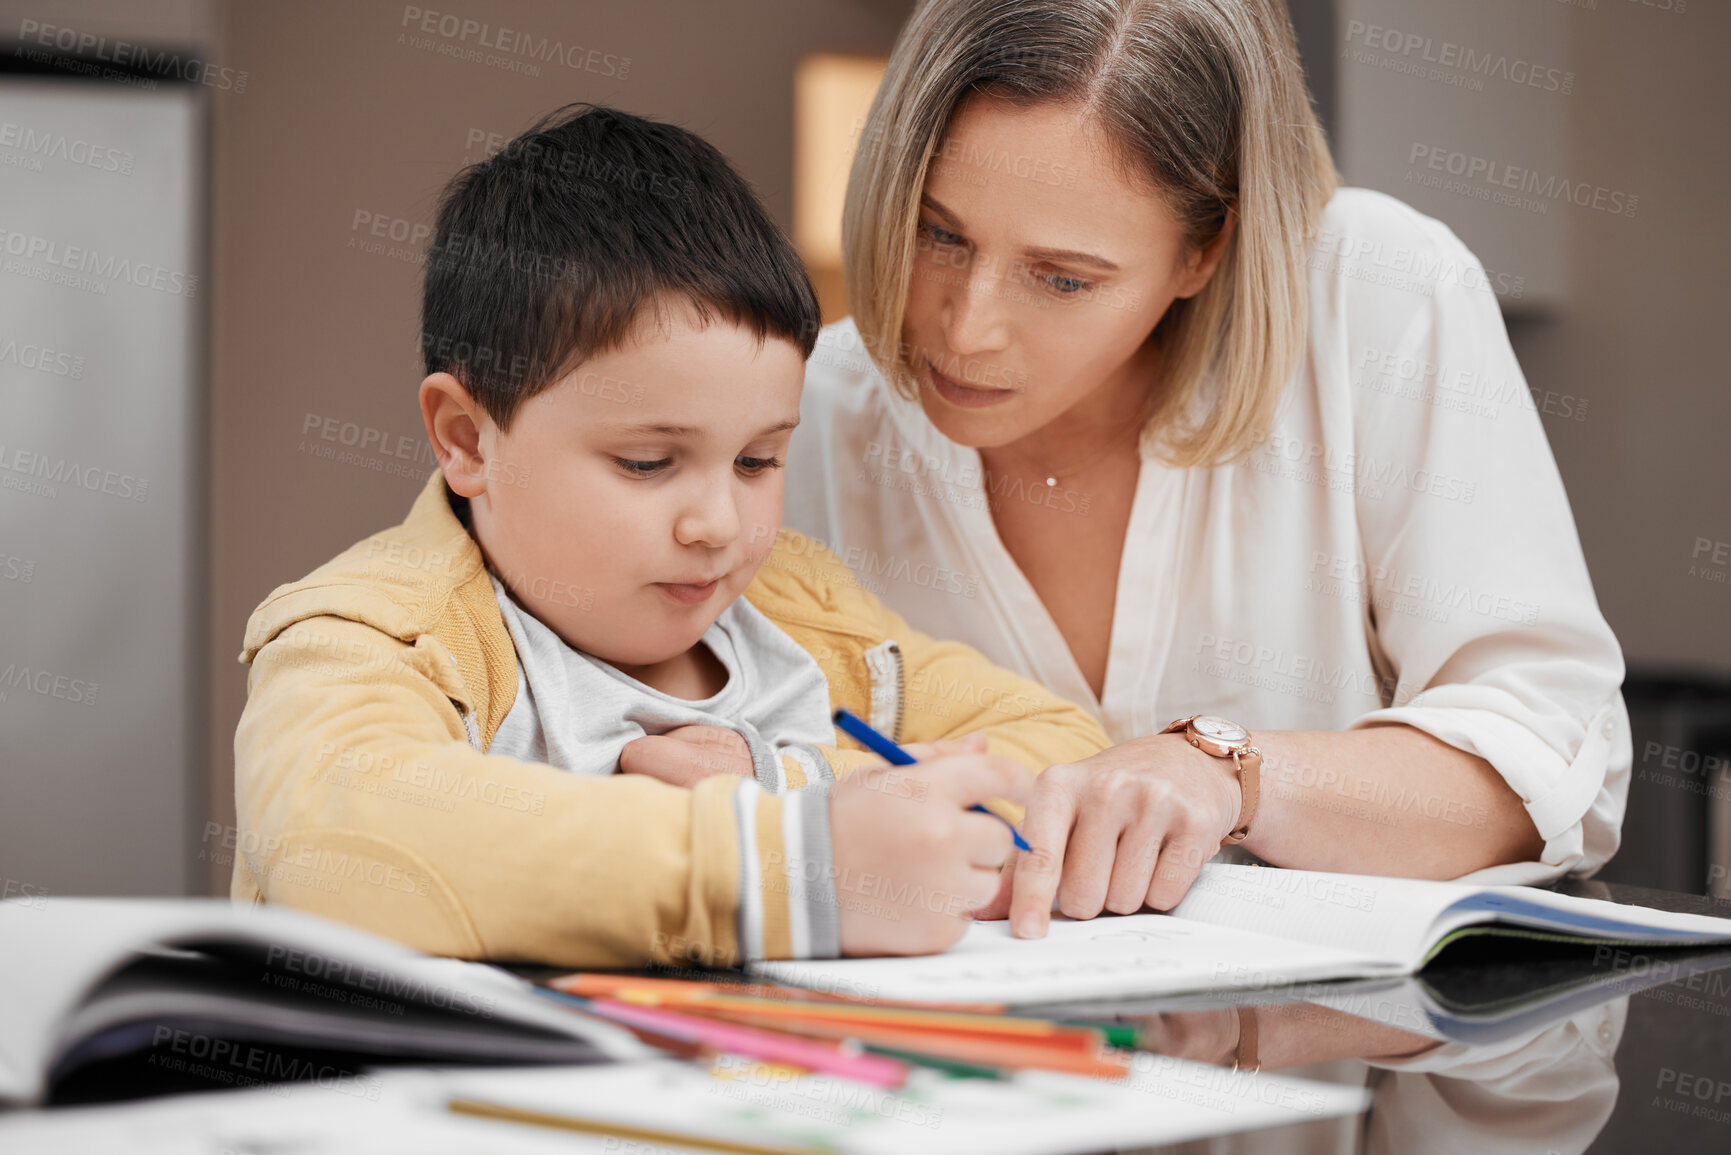 Buy stock photo Shot of a beautiful mother helping her son with his homework